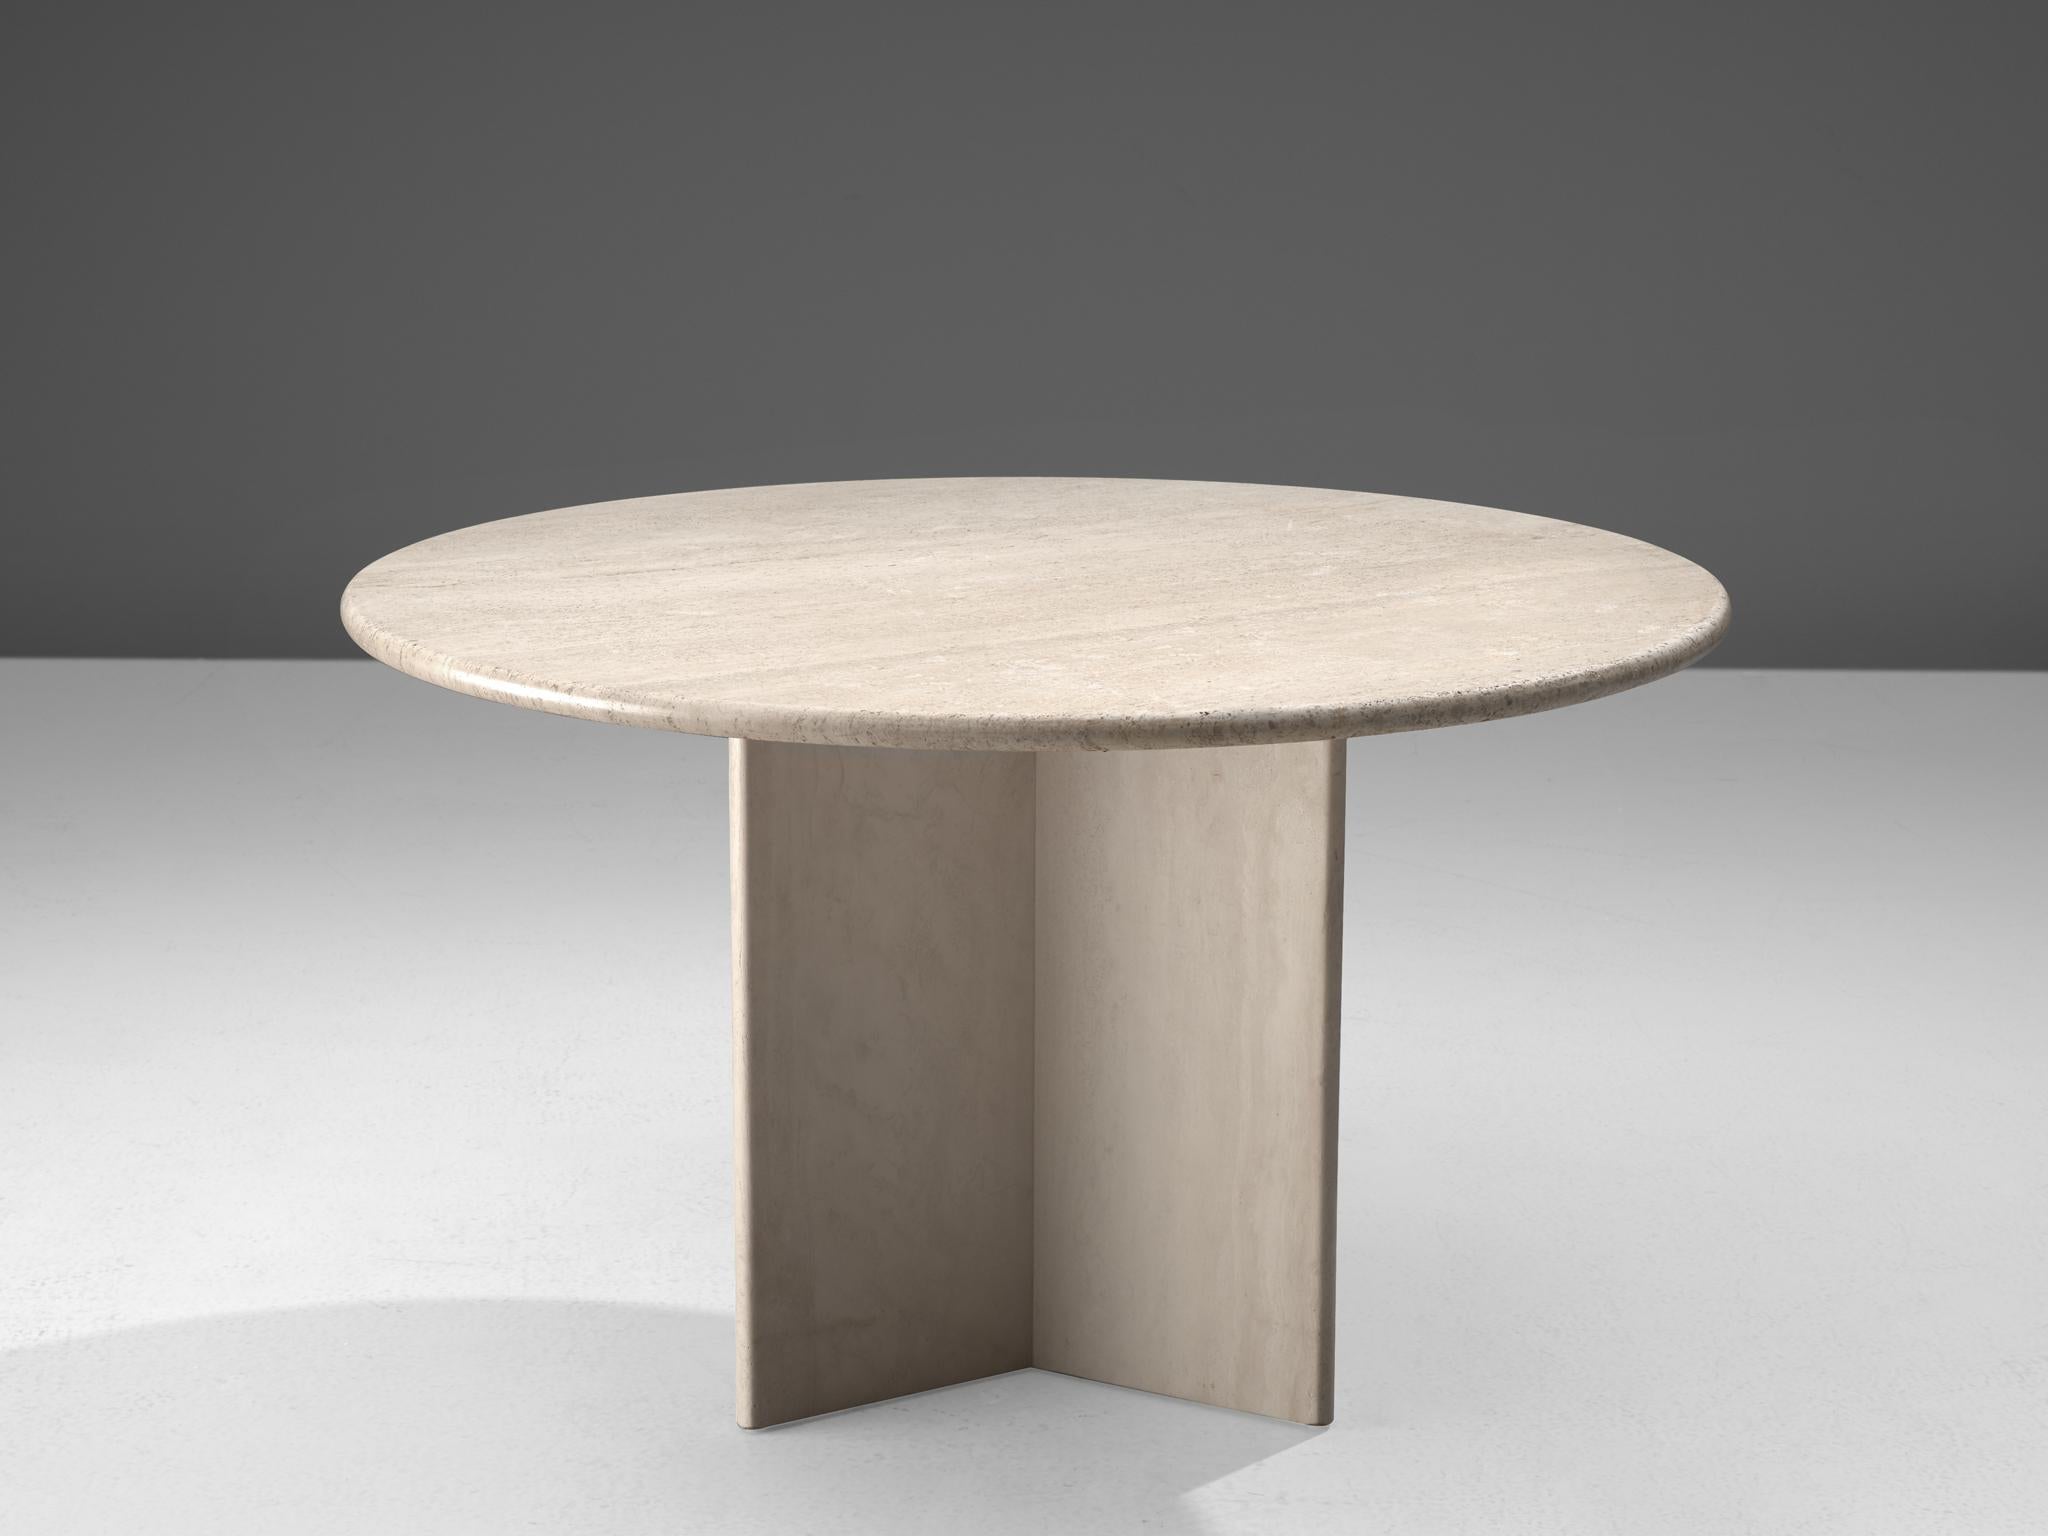 Centre table, travertine, Europe, 1970s.

This strong design dining table features a massive, triangular shaped foot and a thick circular travertine table top. The aesthetics are archetypical for postmodern design, bearing references to